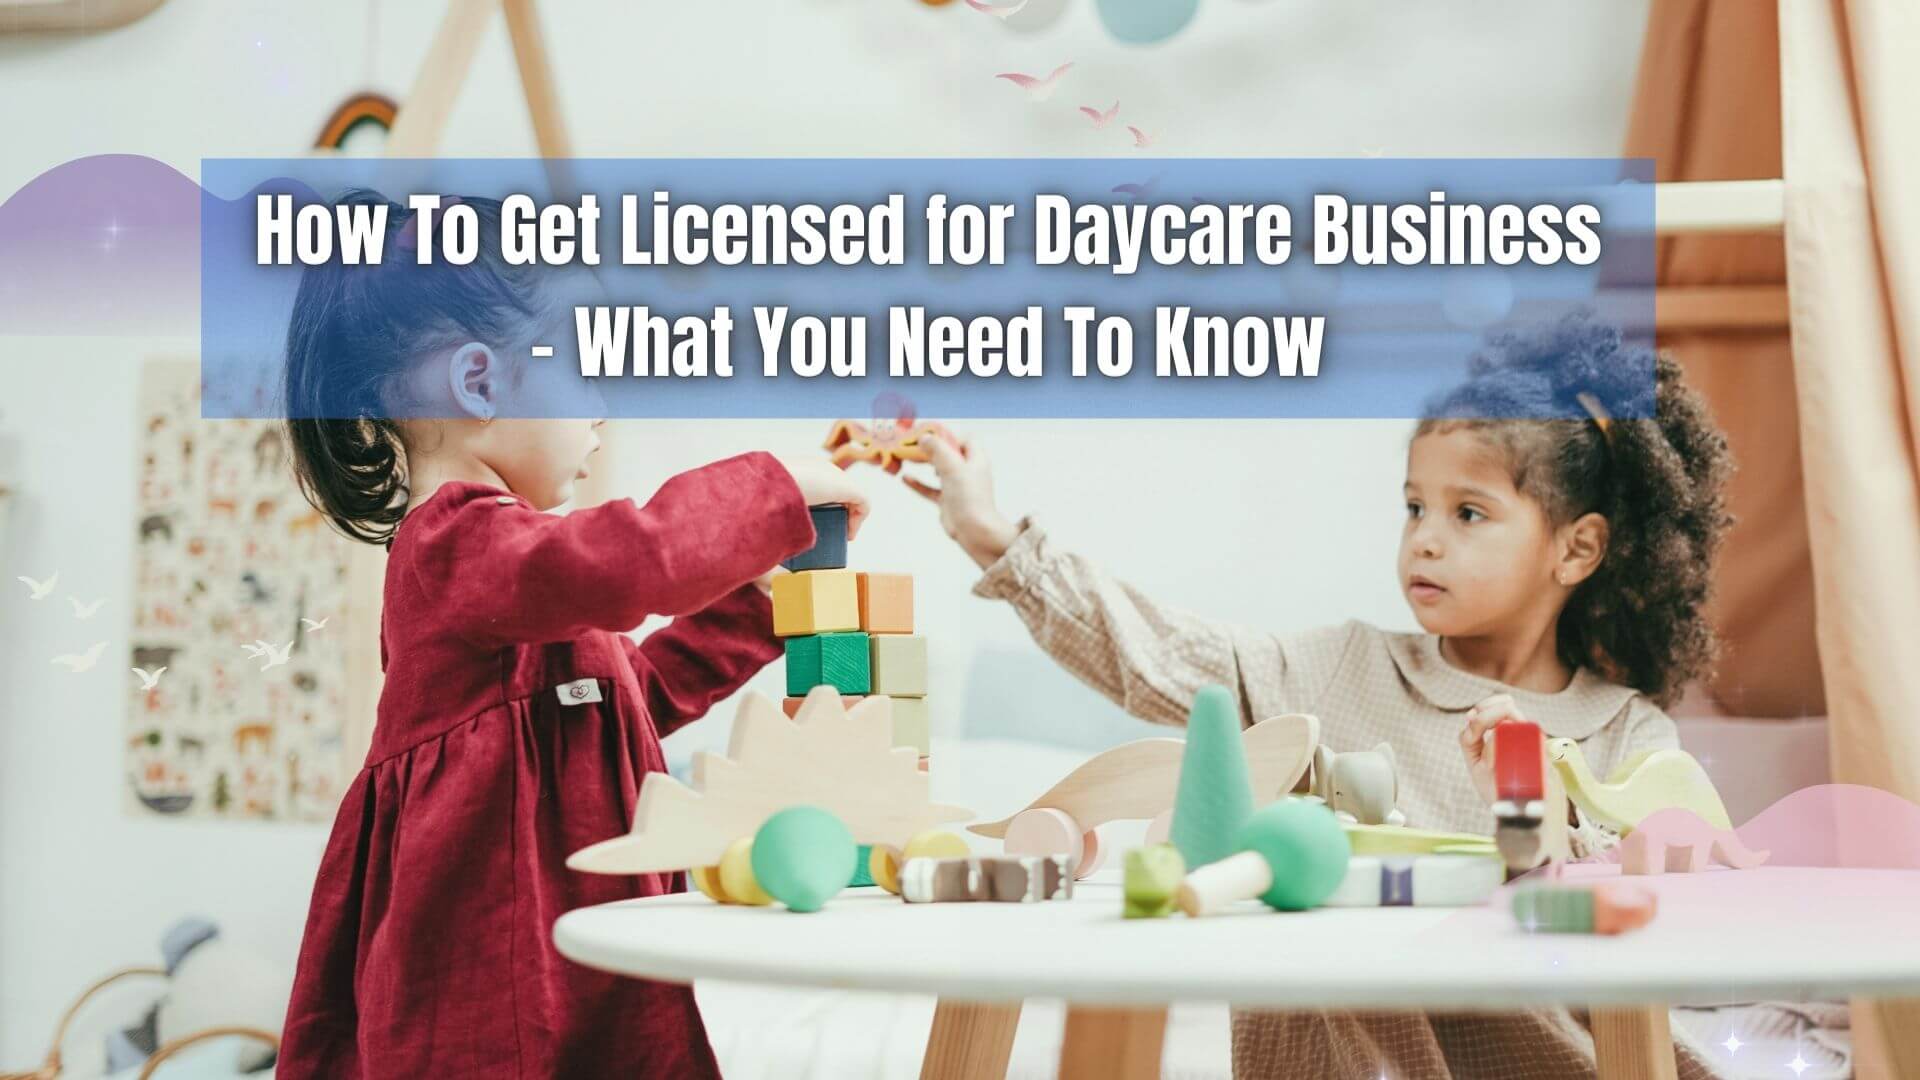 Before you begin running a daycare facility, you must understand the requirements on how to get licensed for daycare business. Here's how!